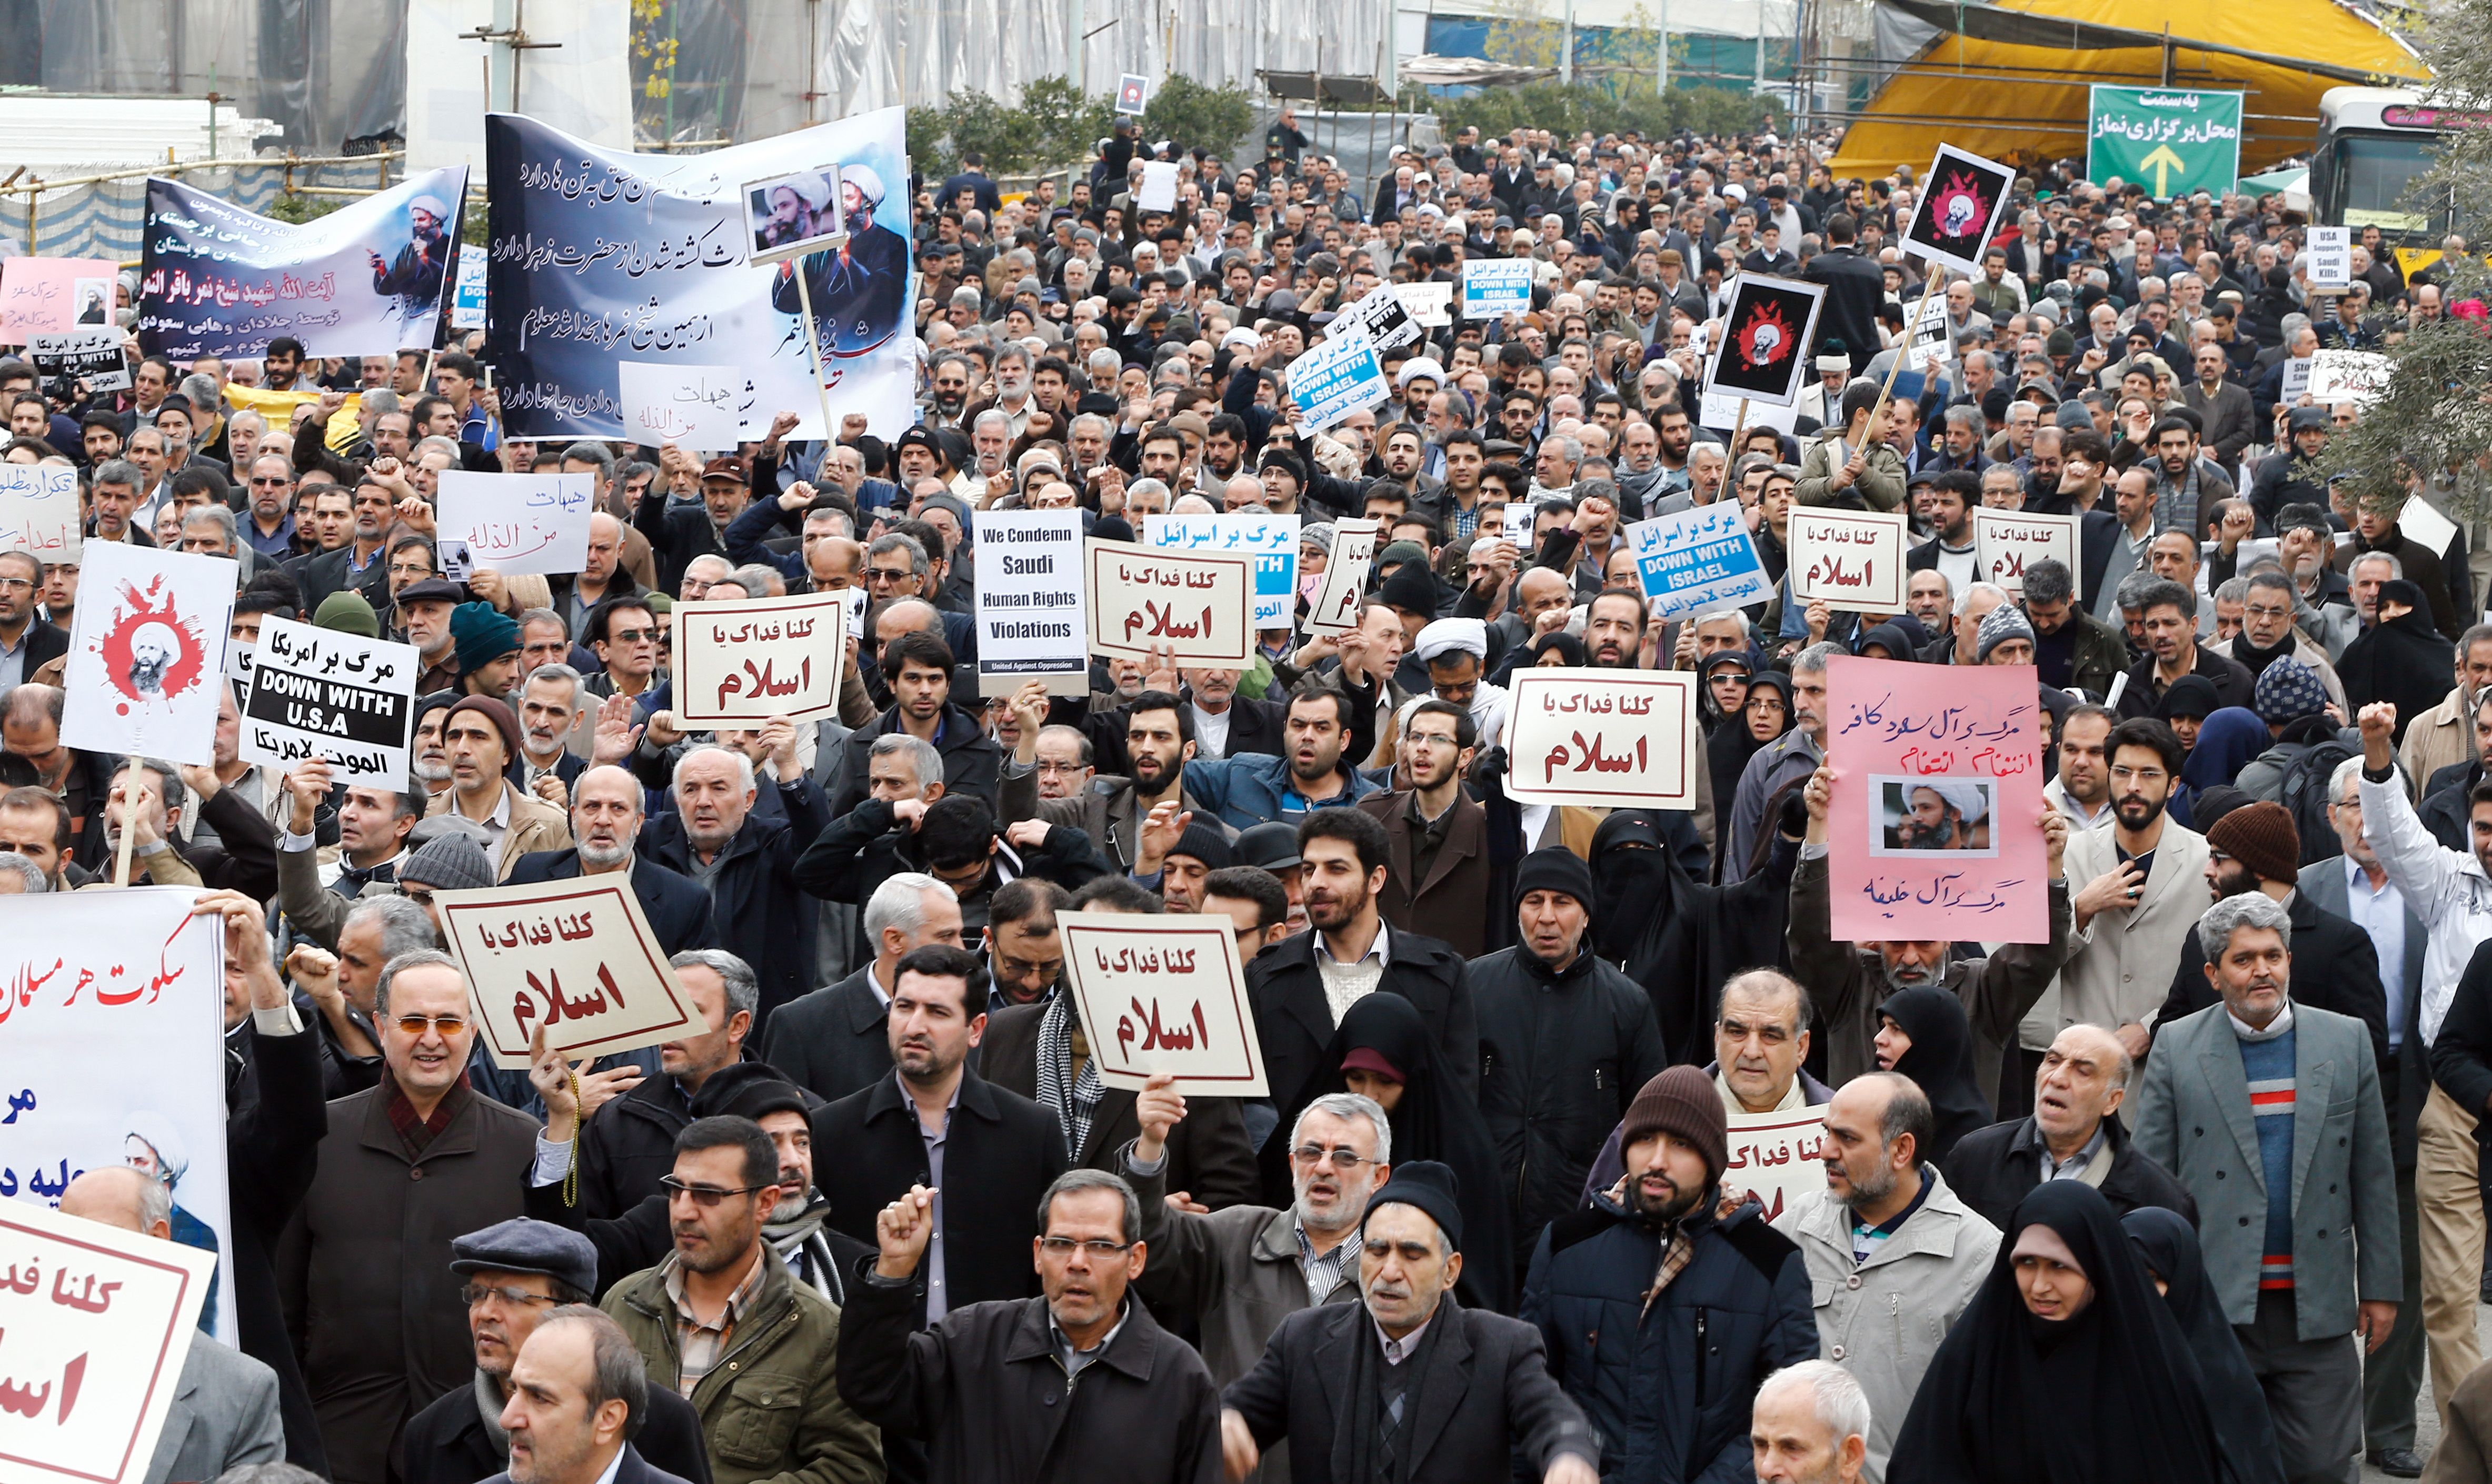 Iranian protesters hold placards and shout slogans during a demonstration in Tehran on January 8, 2016, against the execution of prominent Shiite Muslim cleric Nimr al-Nimr by Saudi authorities. Nimr was executed on January 2, 2016, along with 46 other prisoners that Riyadh said were "terrorists". (AFP/Getty Images)